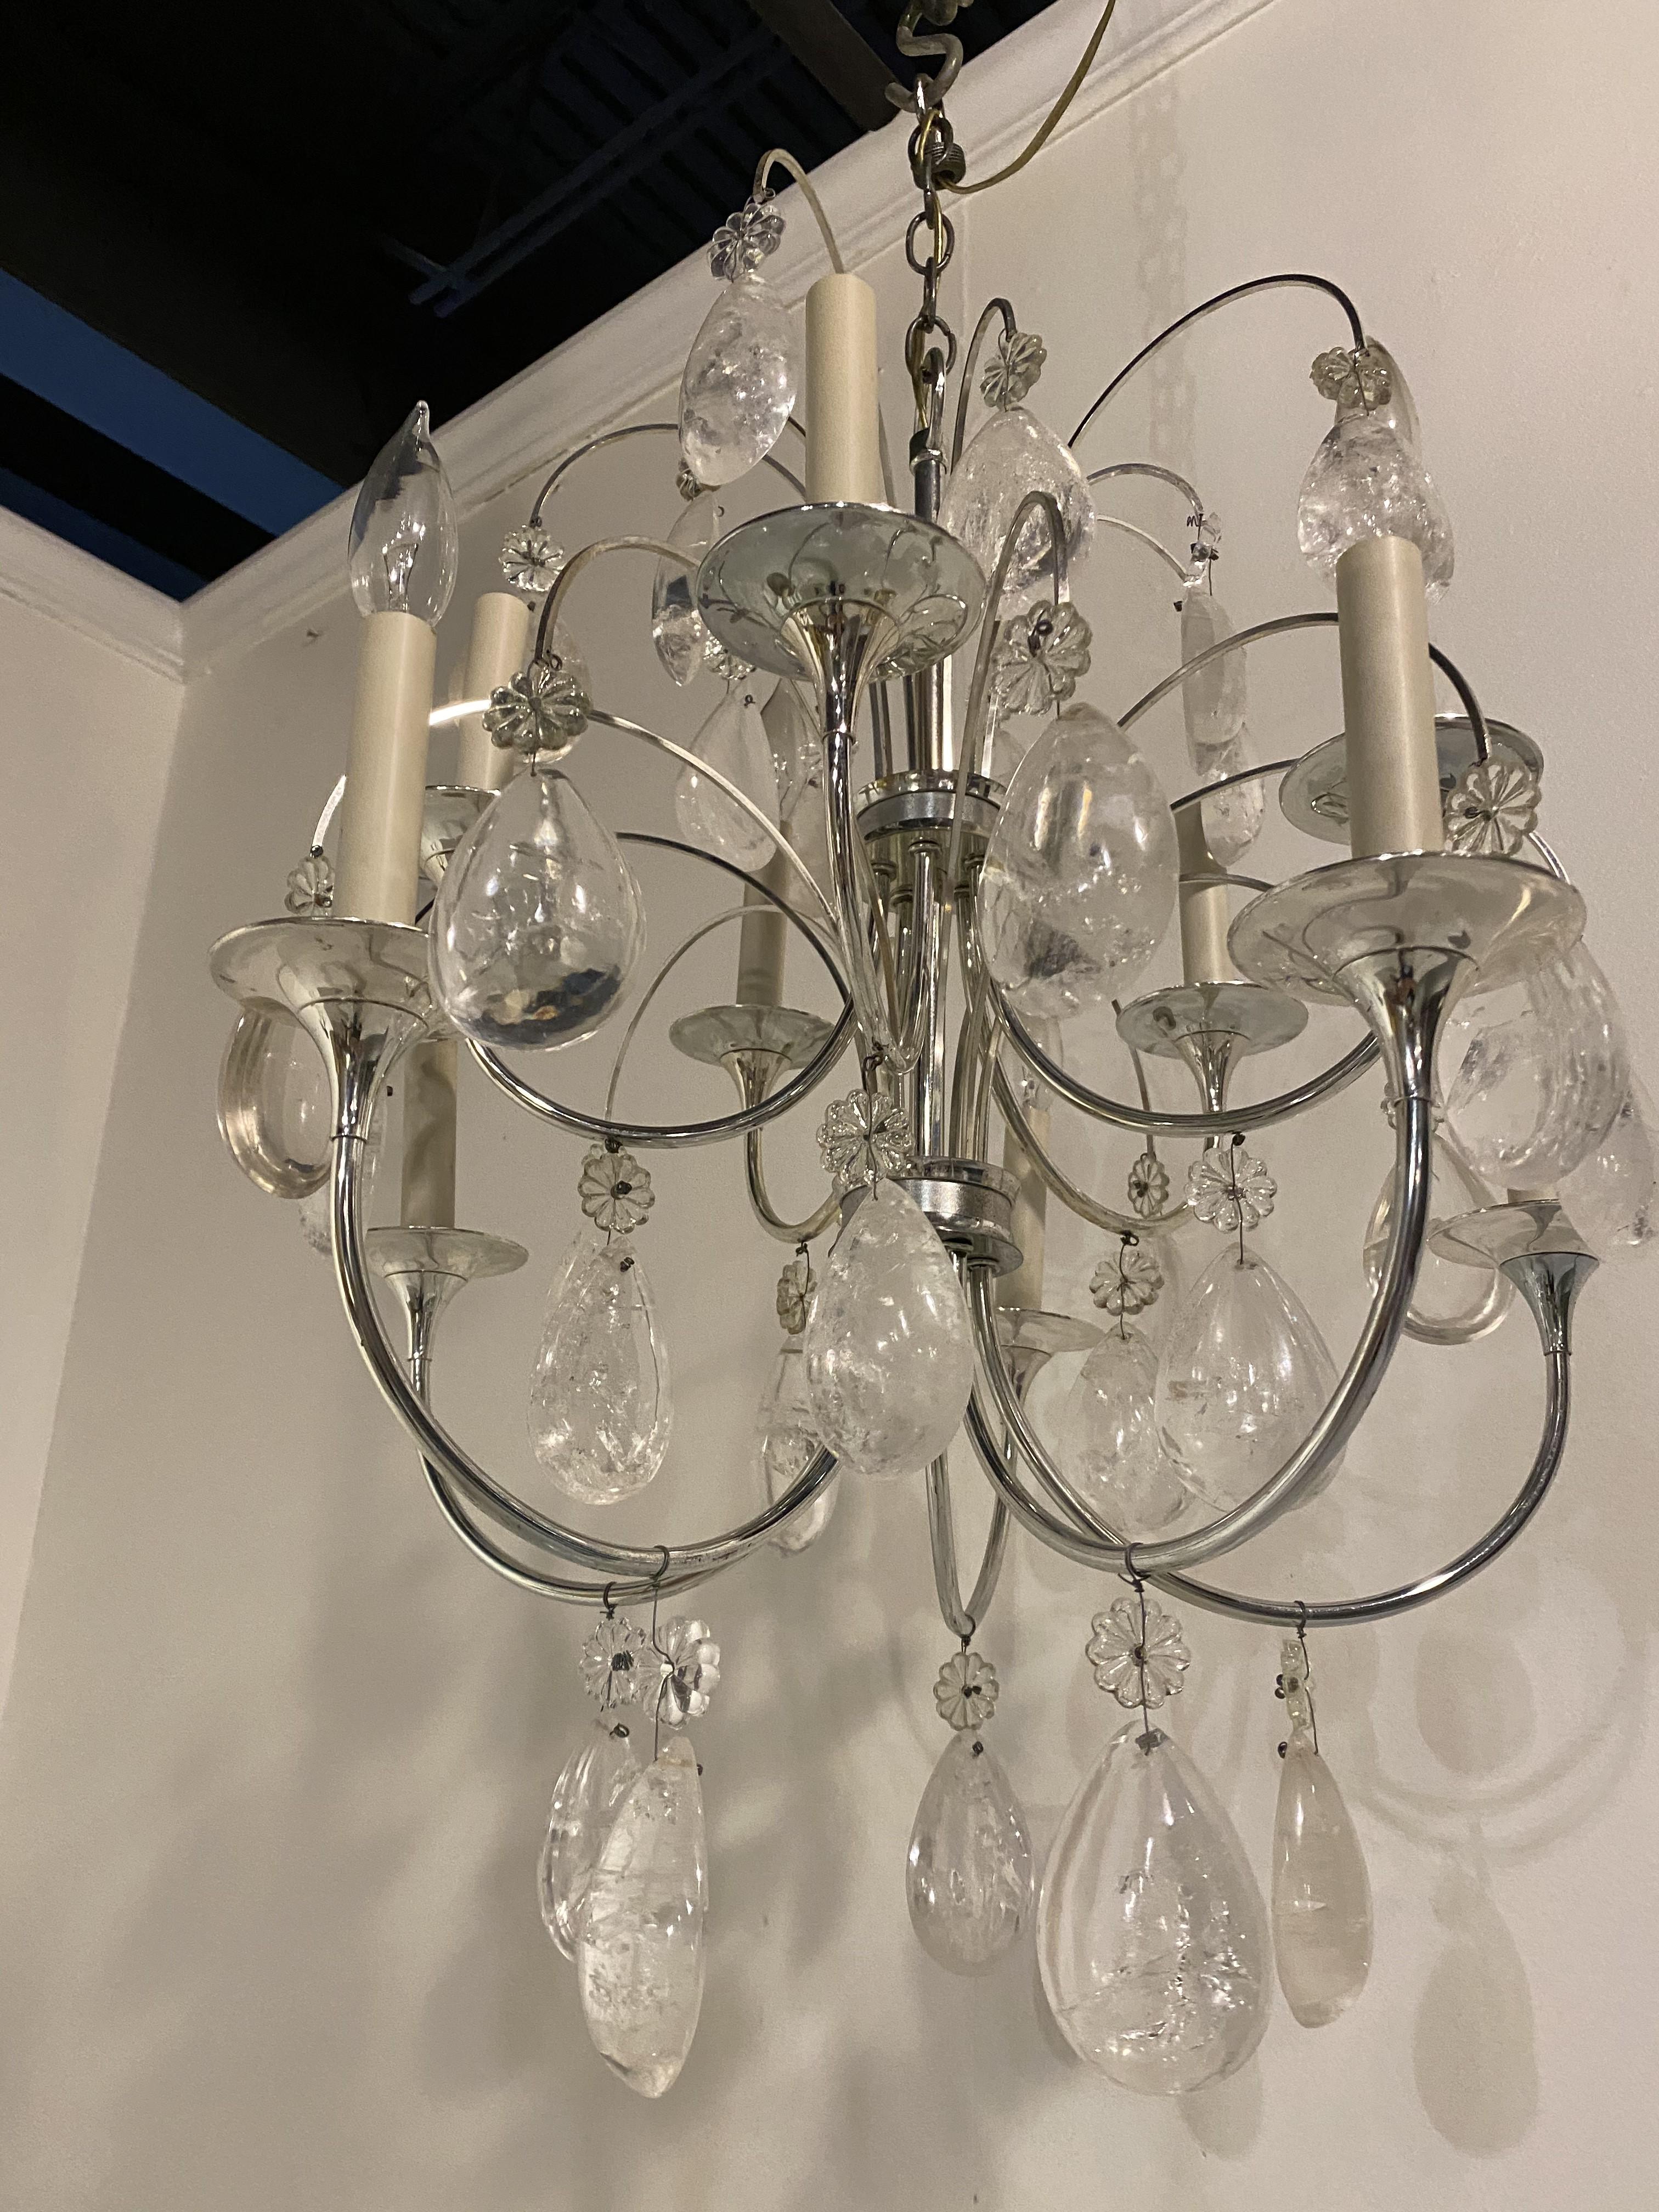 Circa 1930's Silver plated chandelier with Rock crystal hangings. Available pair 